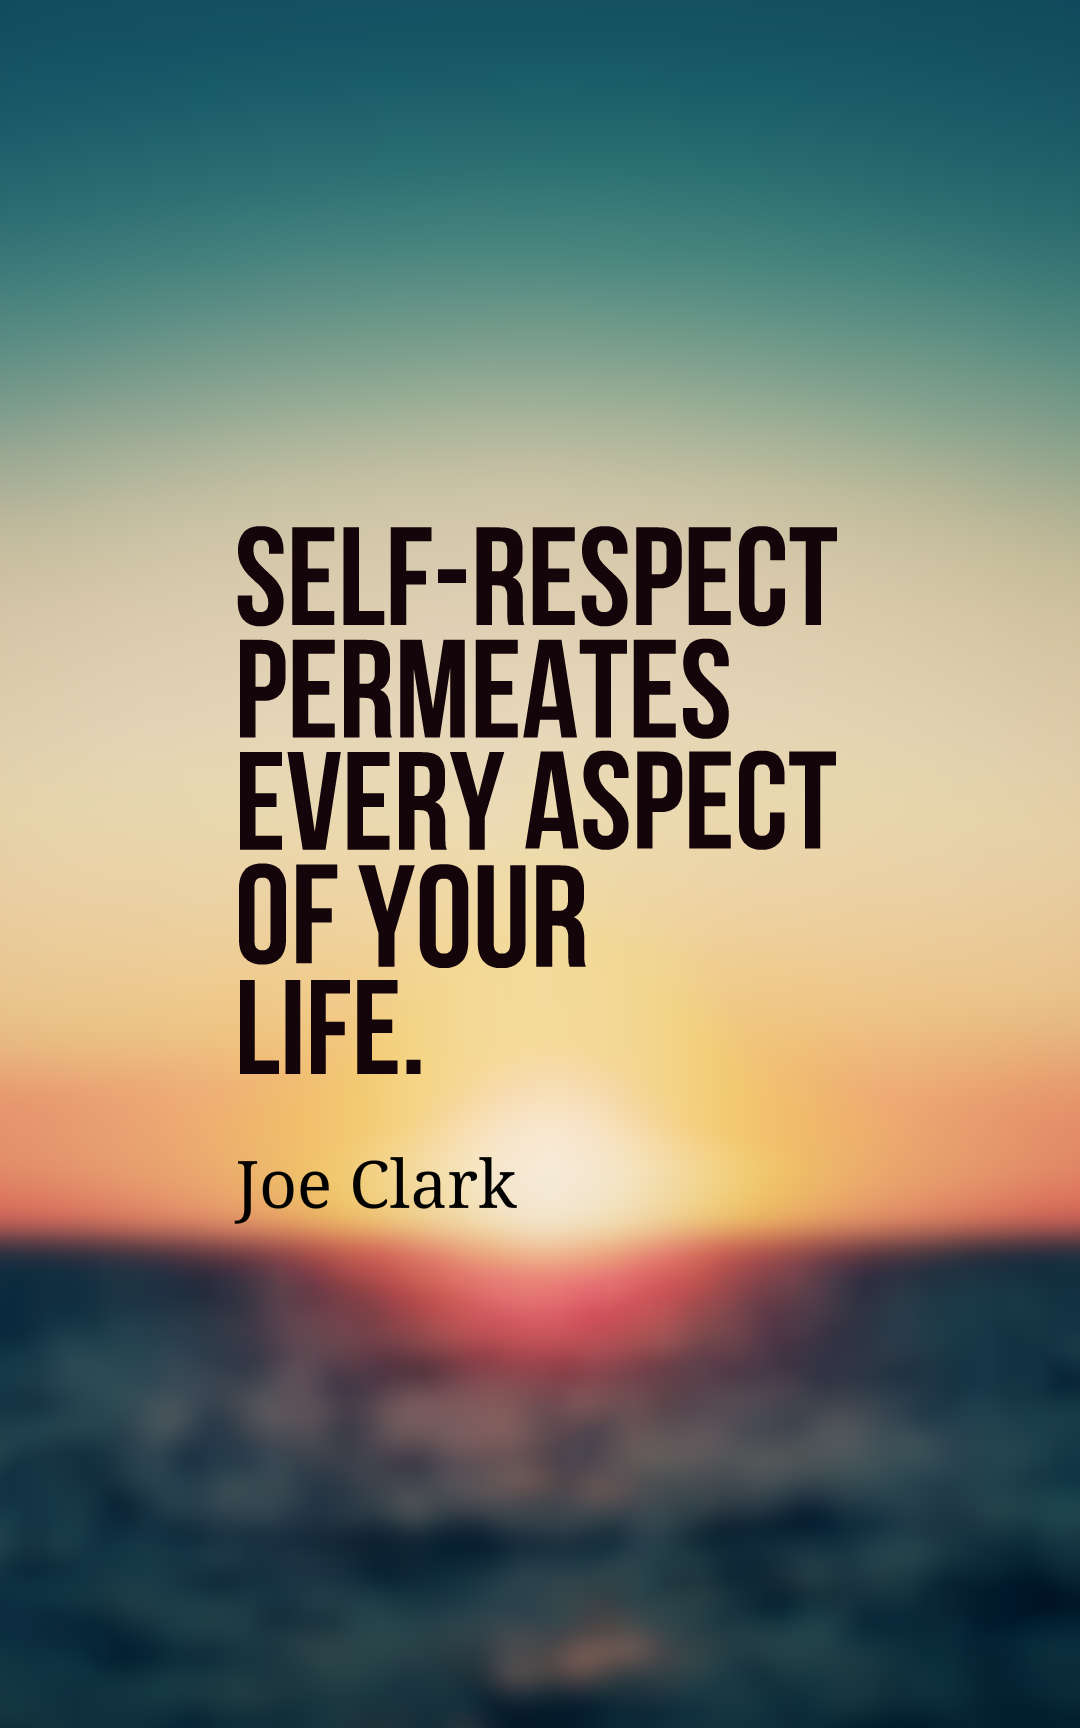 Self-respect permeates every aspect of your life.